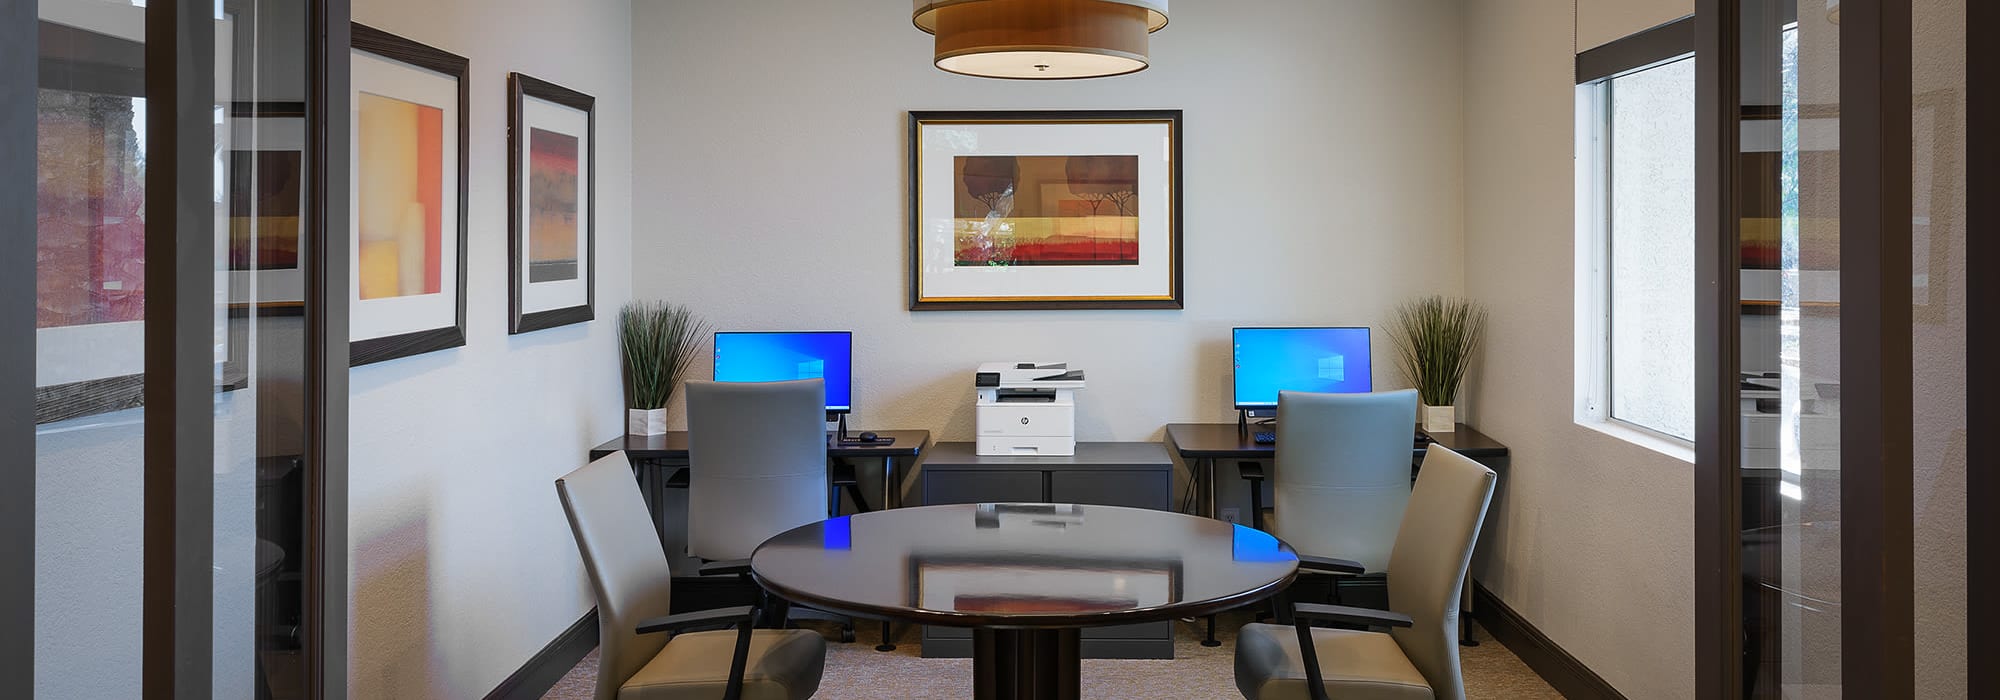 Business center at The Regents at Scottsdale in Scottsdale, Arizona